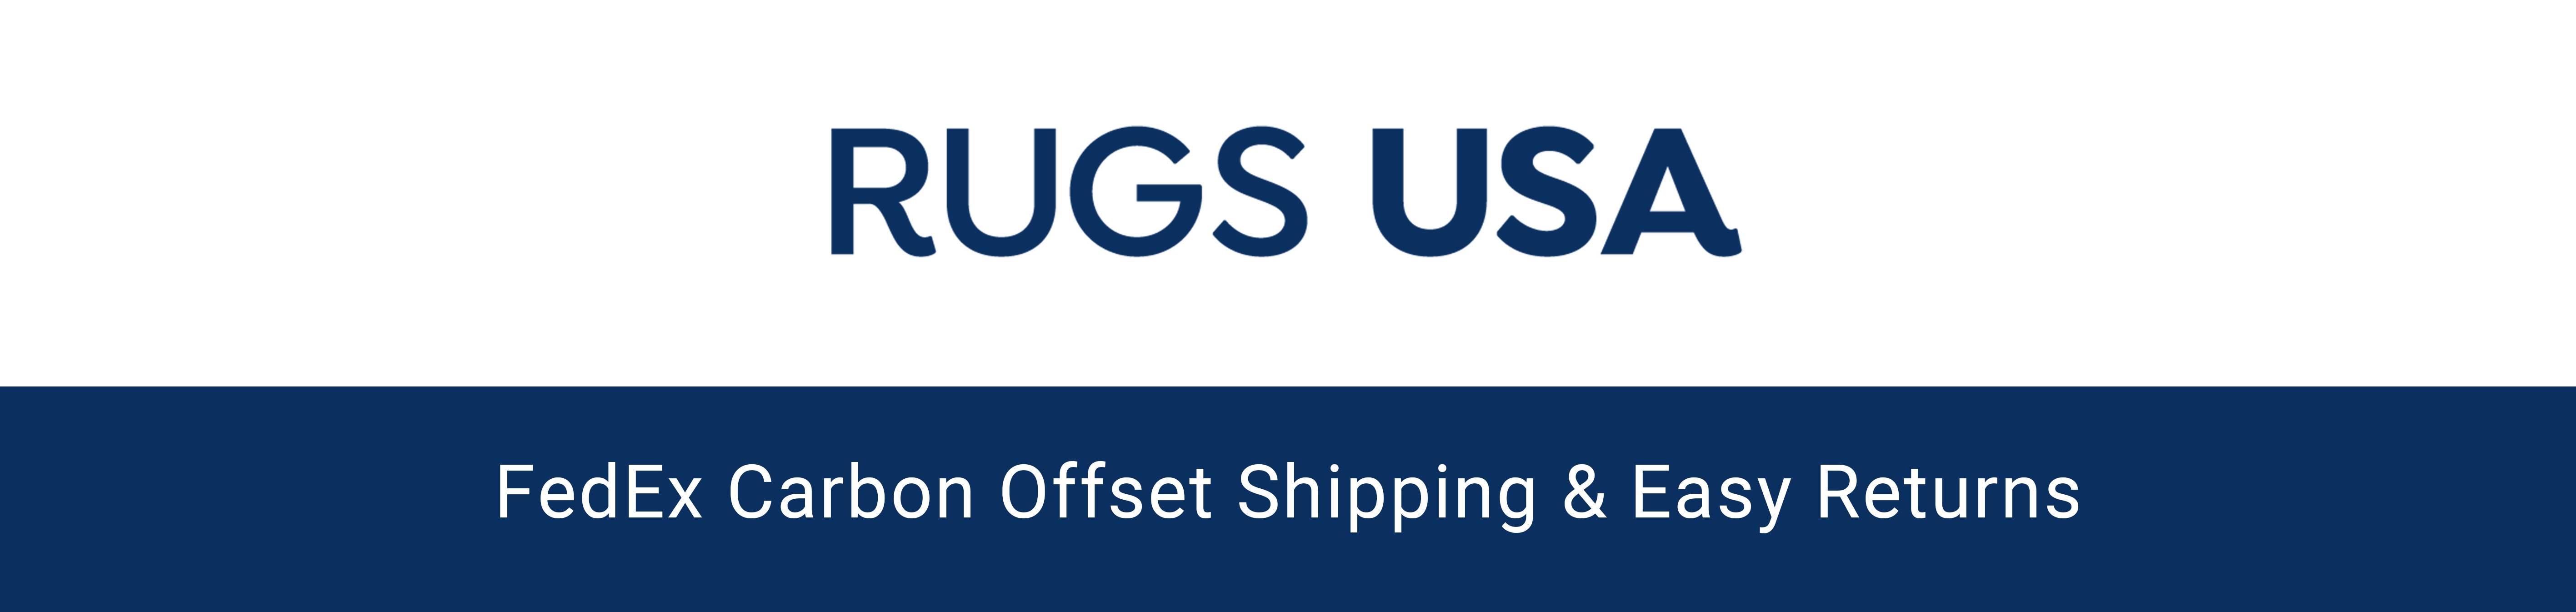 Rugs USA | FedEx Carbon Offset Shipping & Easy Returns